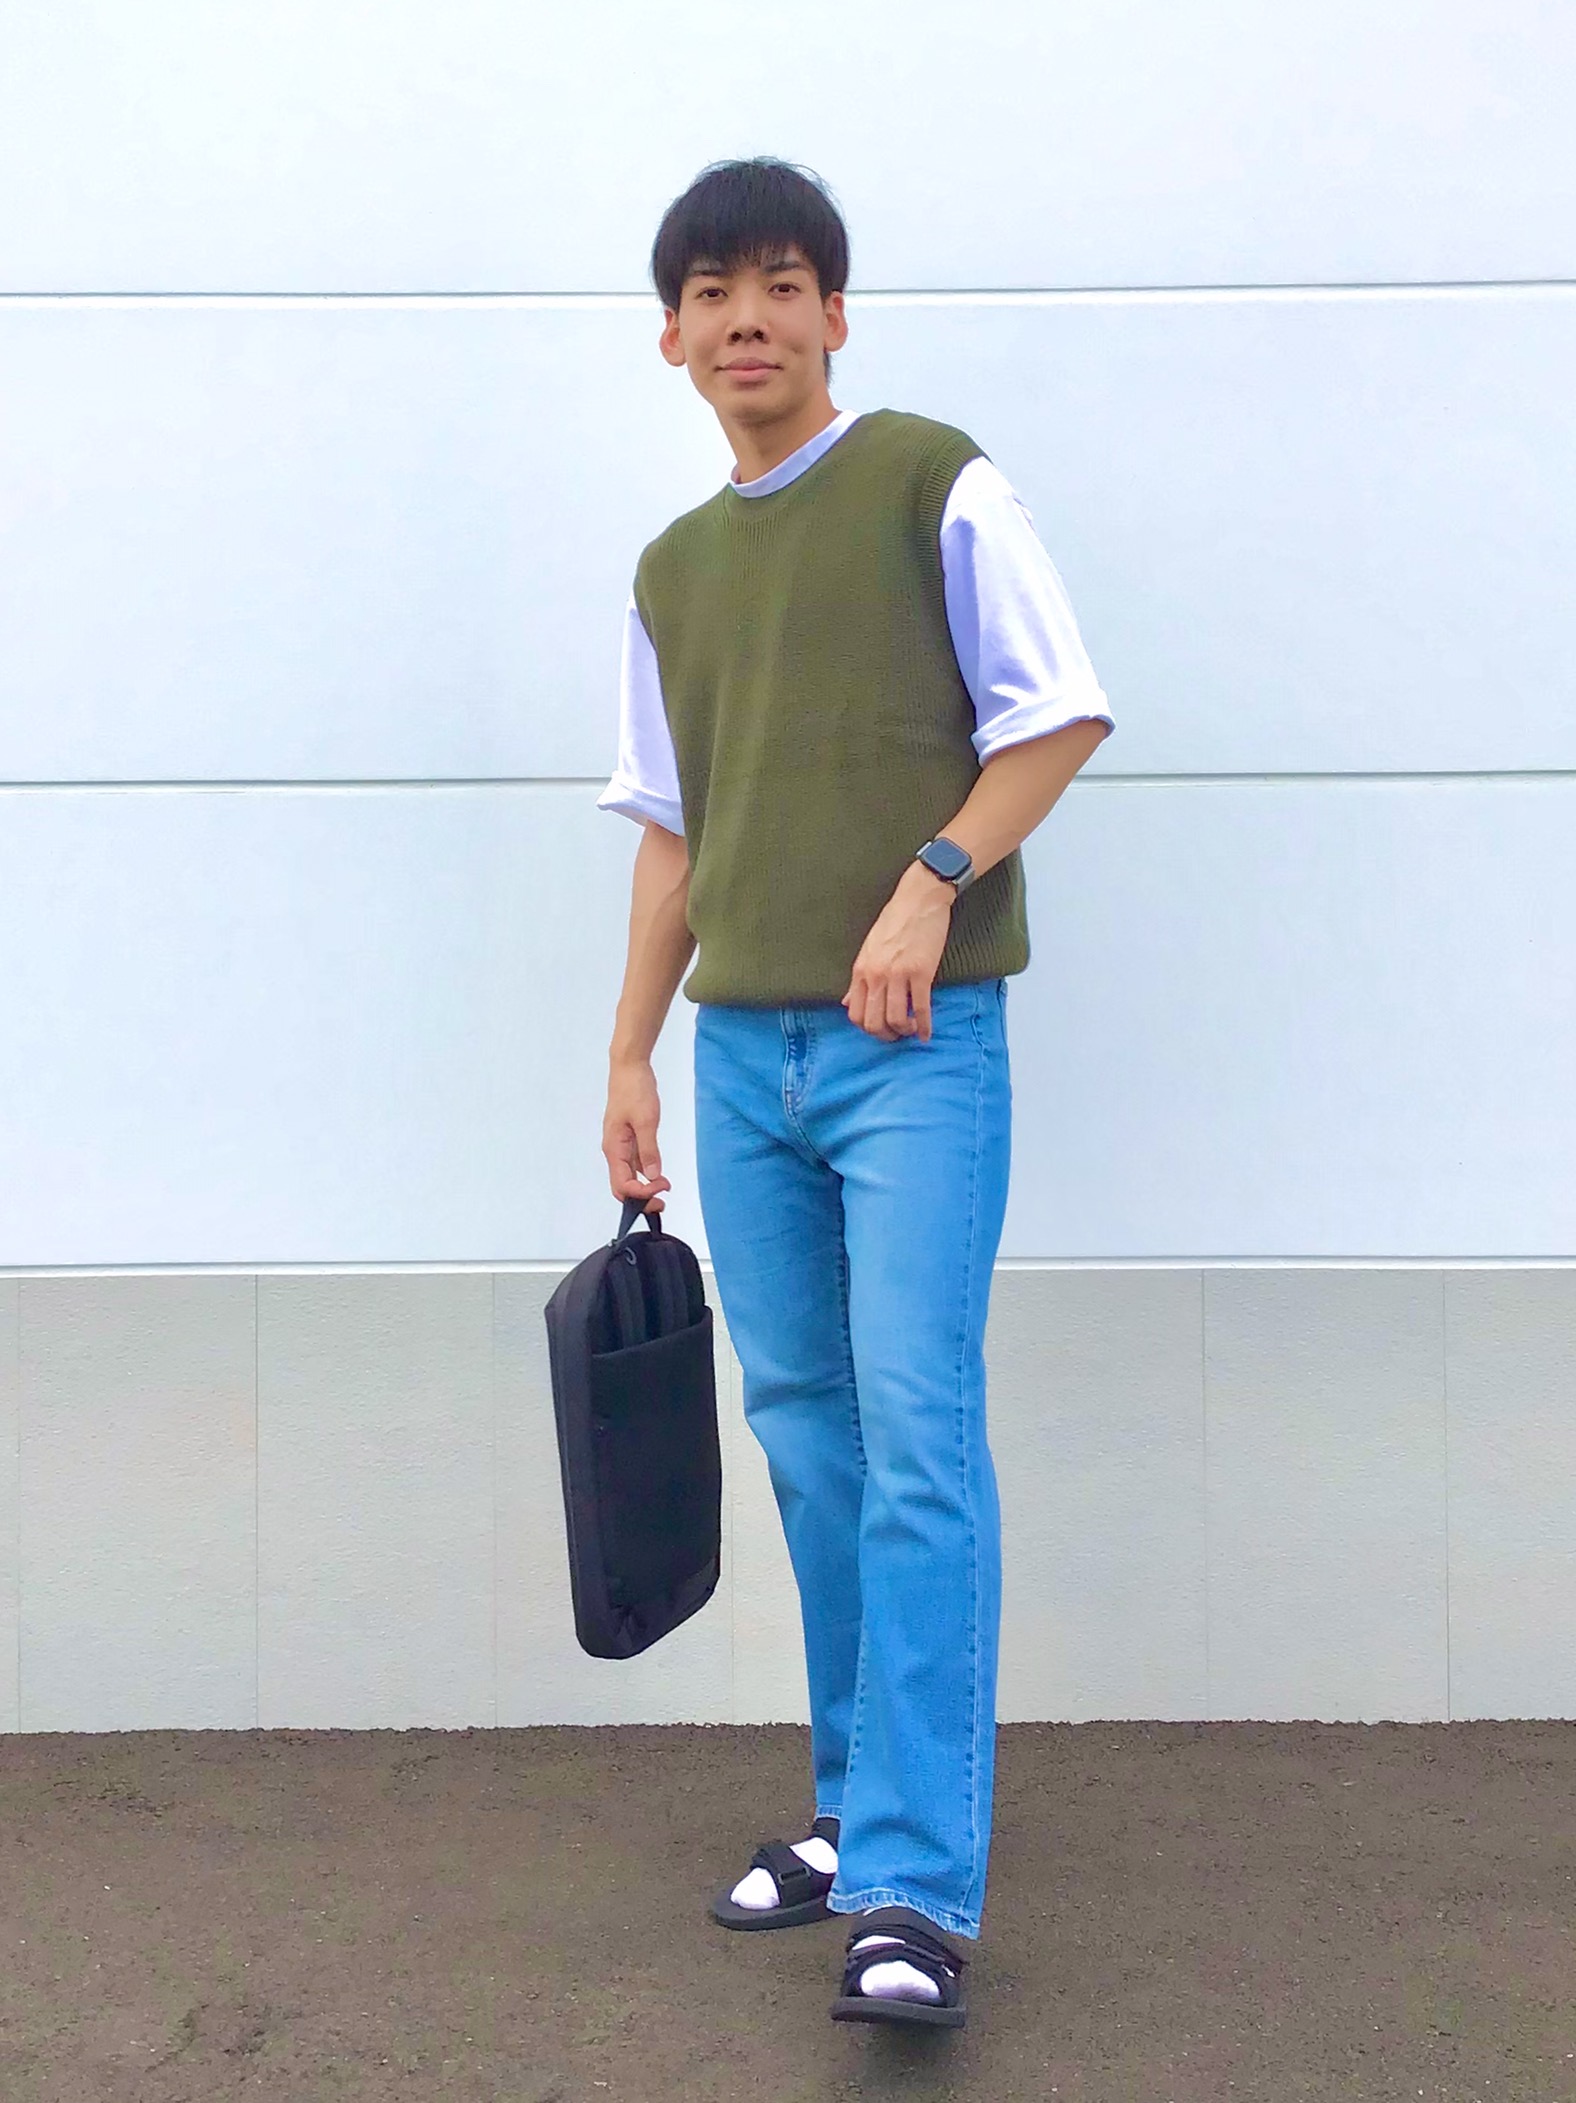 unfil cotton-weather stand collar shirt - シャツ